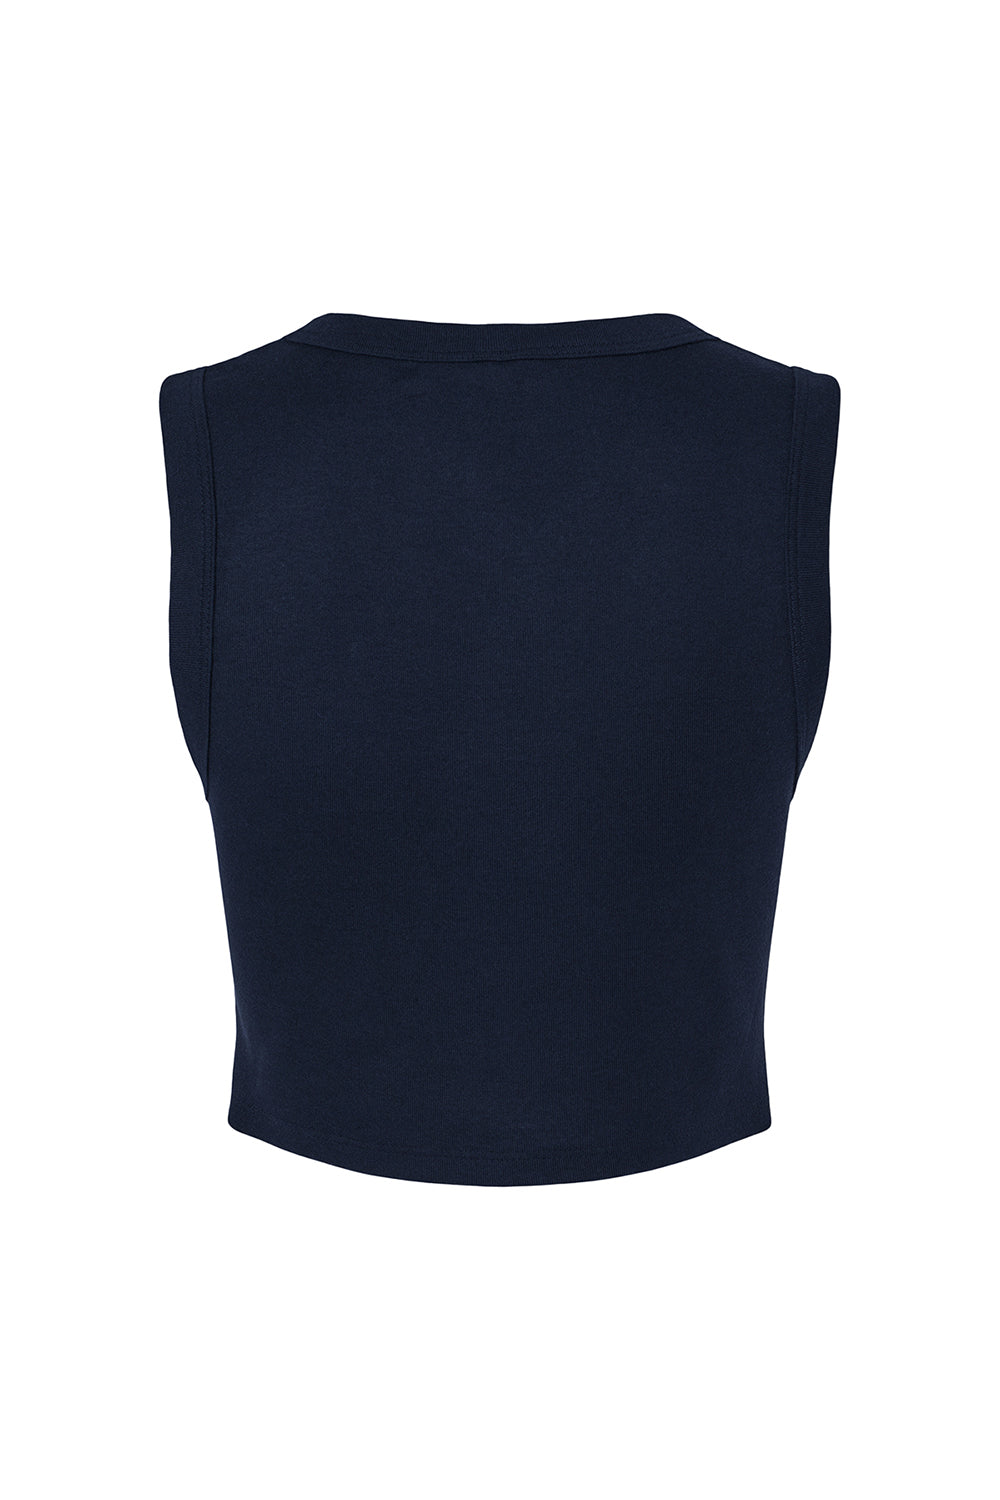 Bella + Canvas 1013BE Womens Micro Ribbed Muscle Crop Tank Top Navy Blue Flat Back